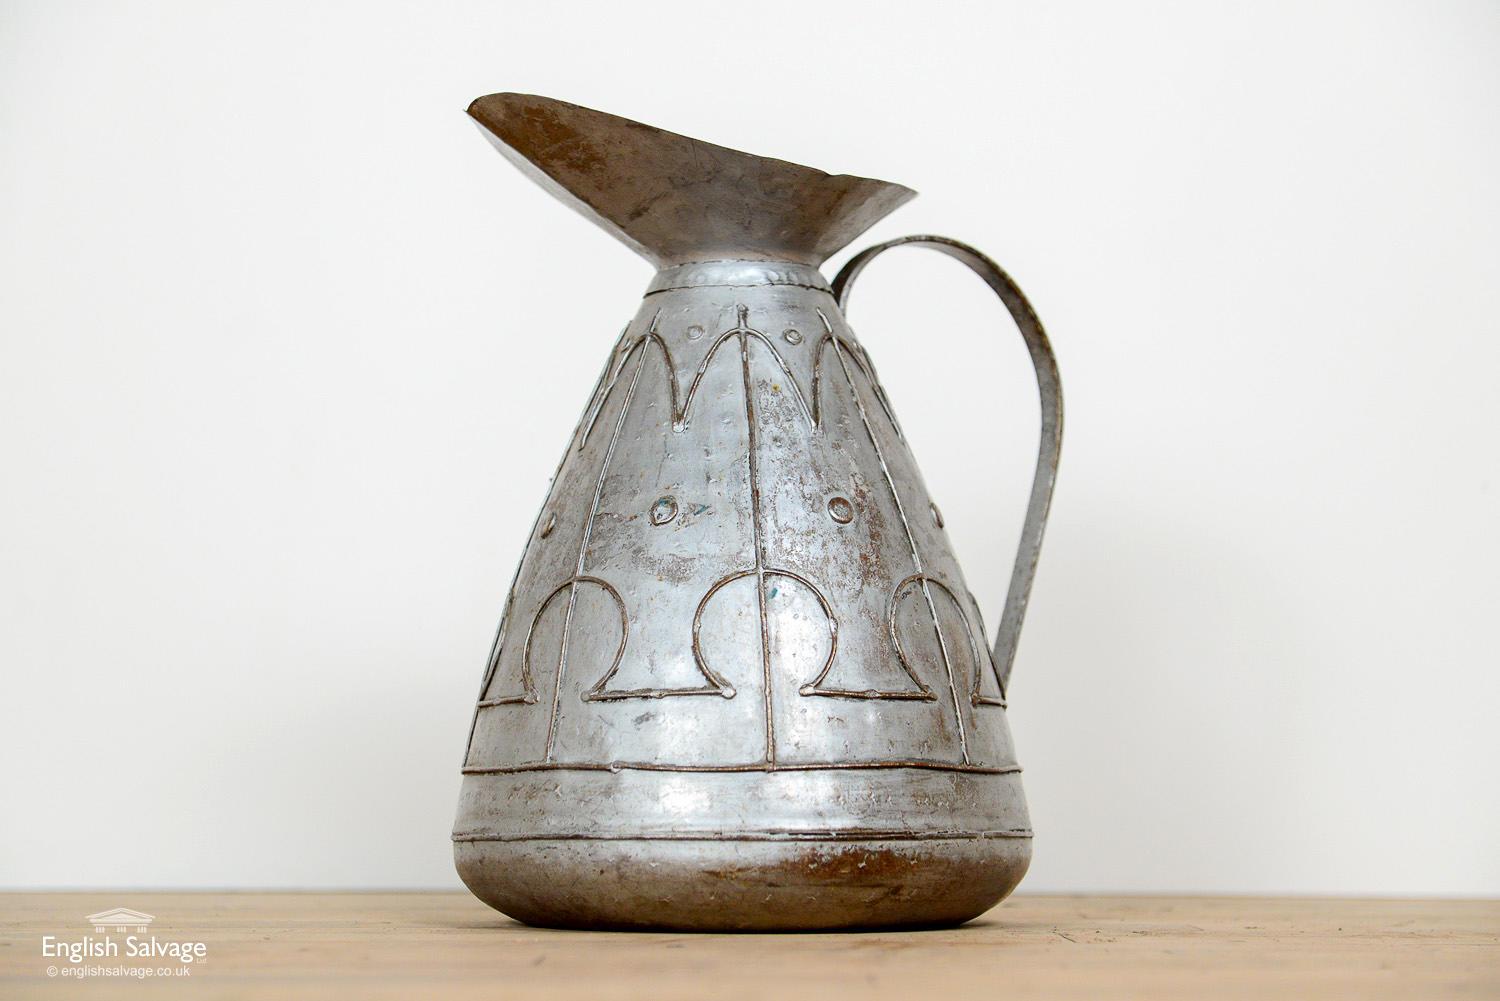 Substantial metal pitcher jug with simple Art Nouveau style decoration applied in moulded wire. It is naively made and has a weathered appearance with small areas of rust/discoloration. Measurements given below are inclusive of handle and spout.